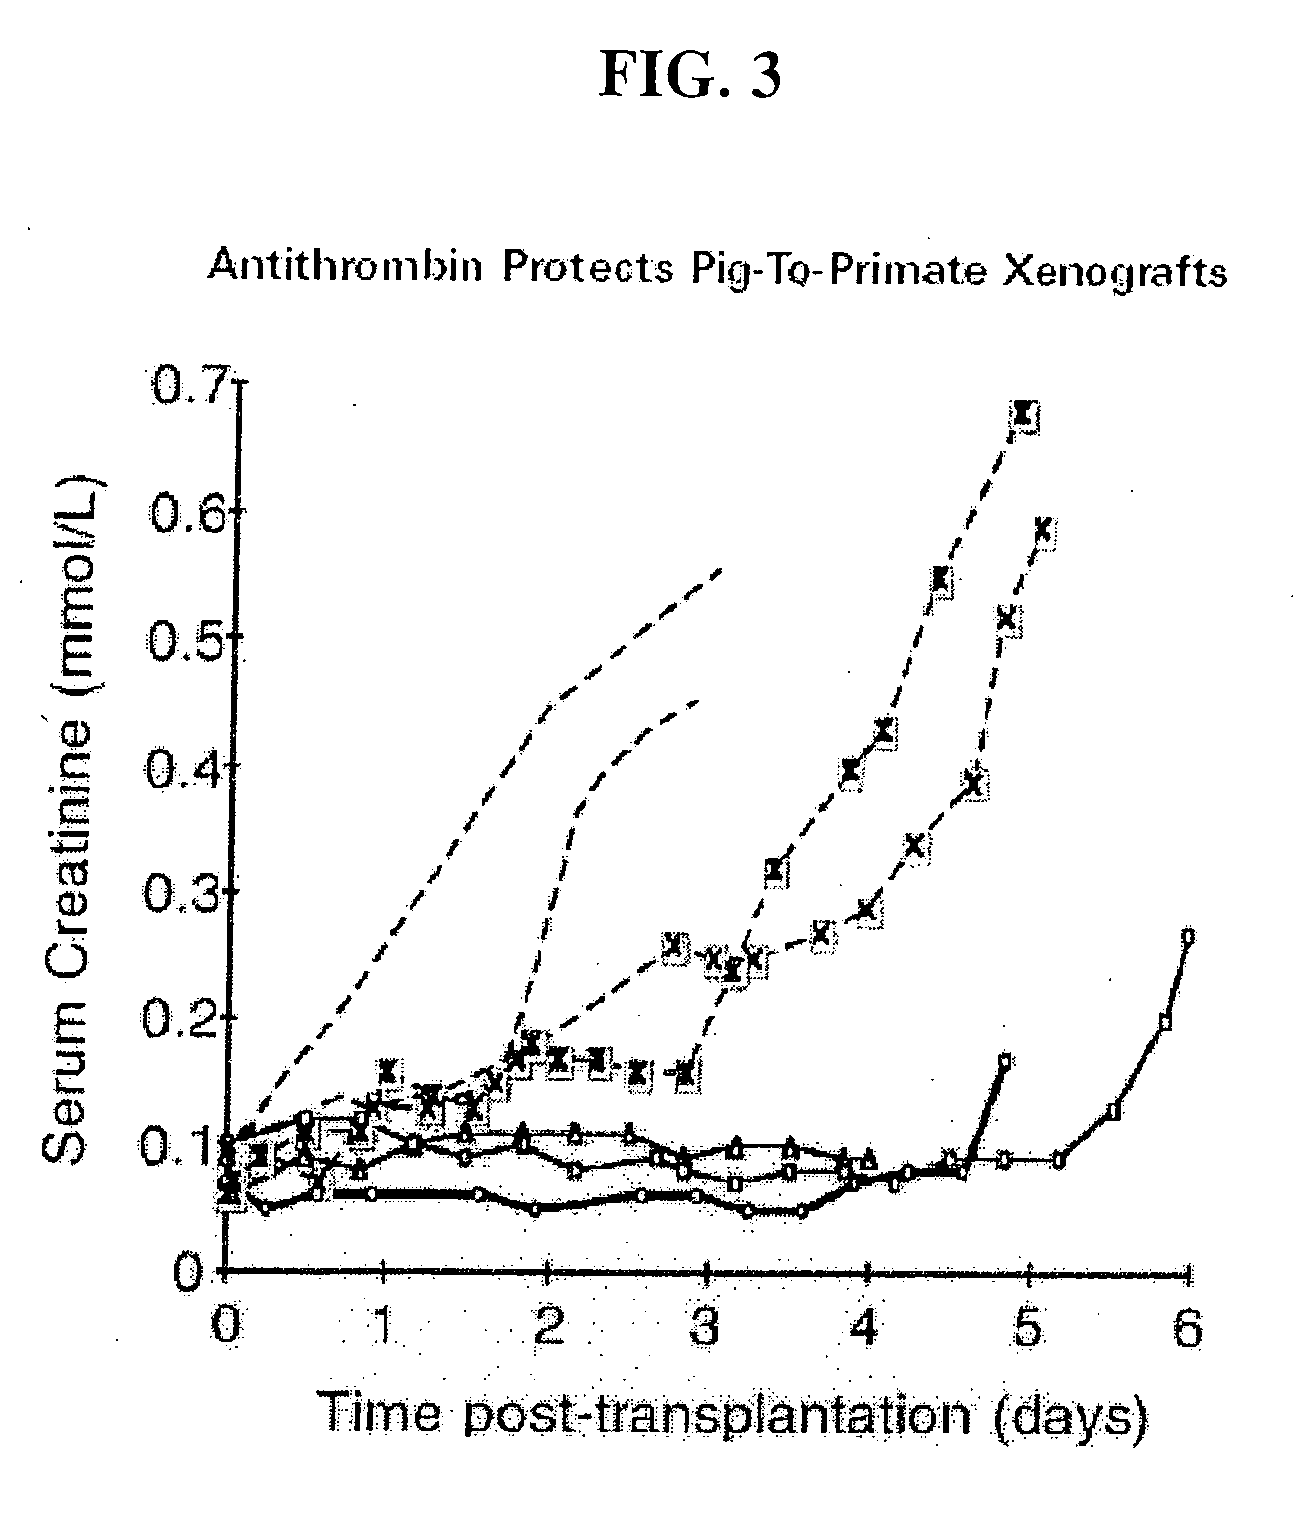 Methods of reducing the incidence of rejection in tissue transplantation through the use of recombinant human antithrombin